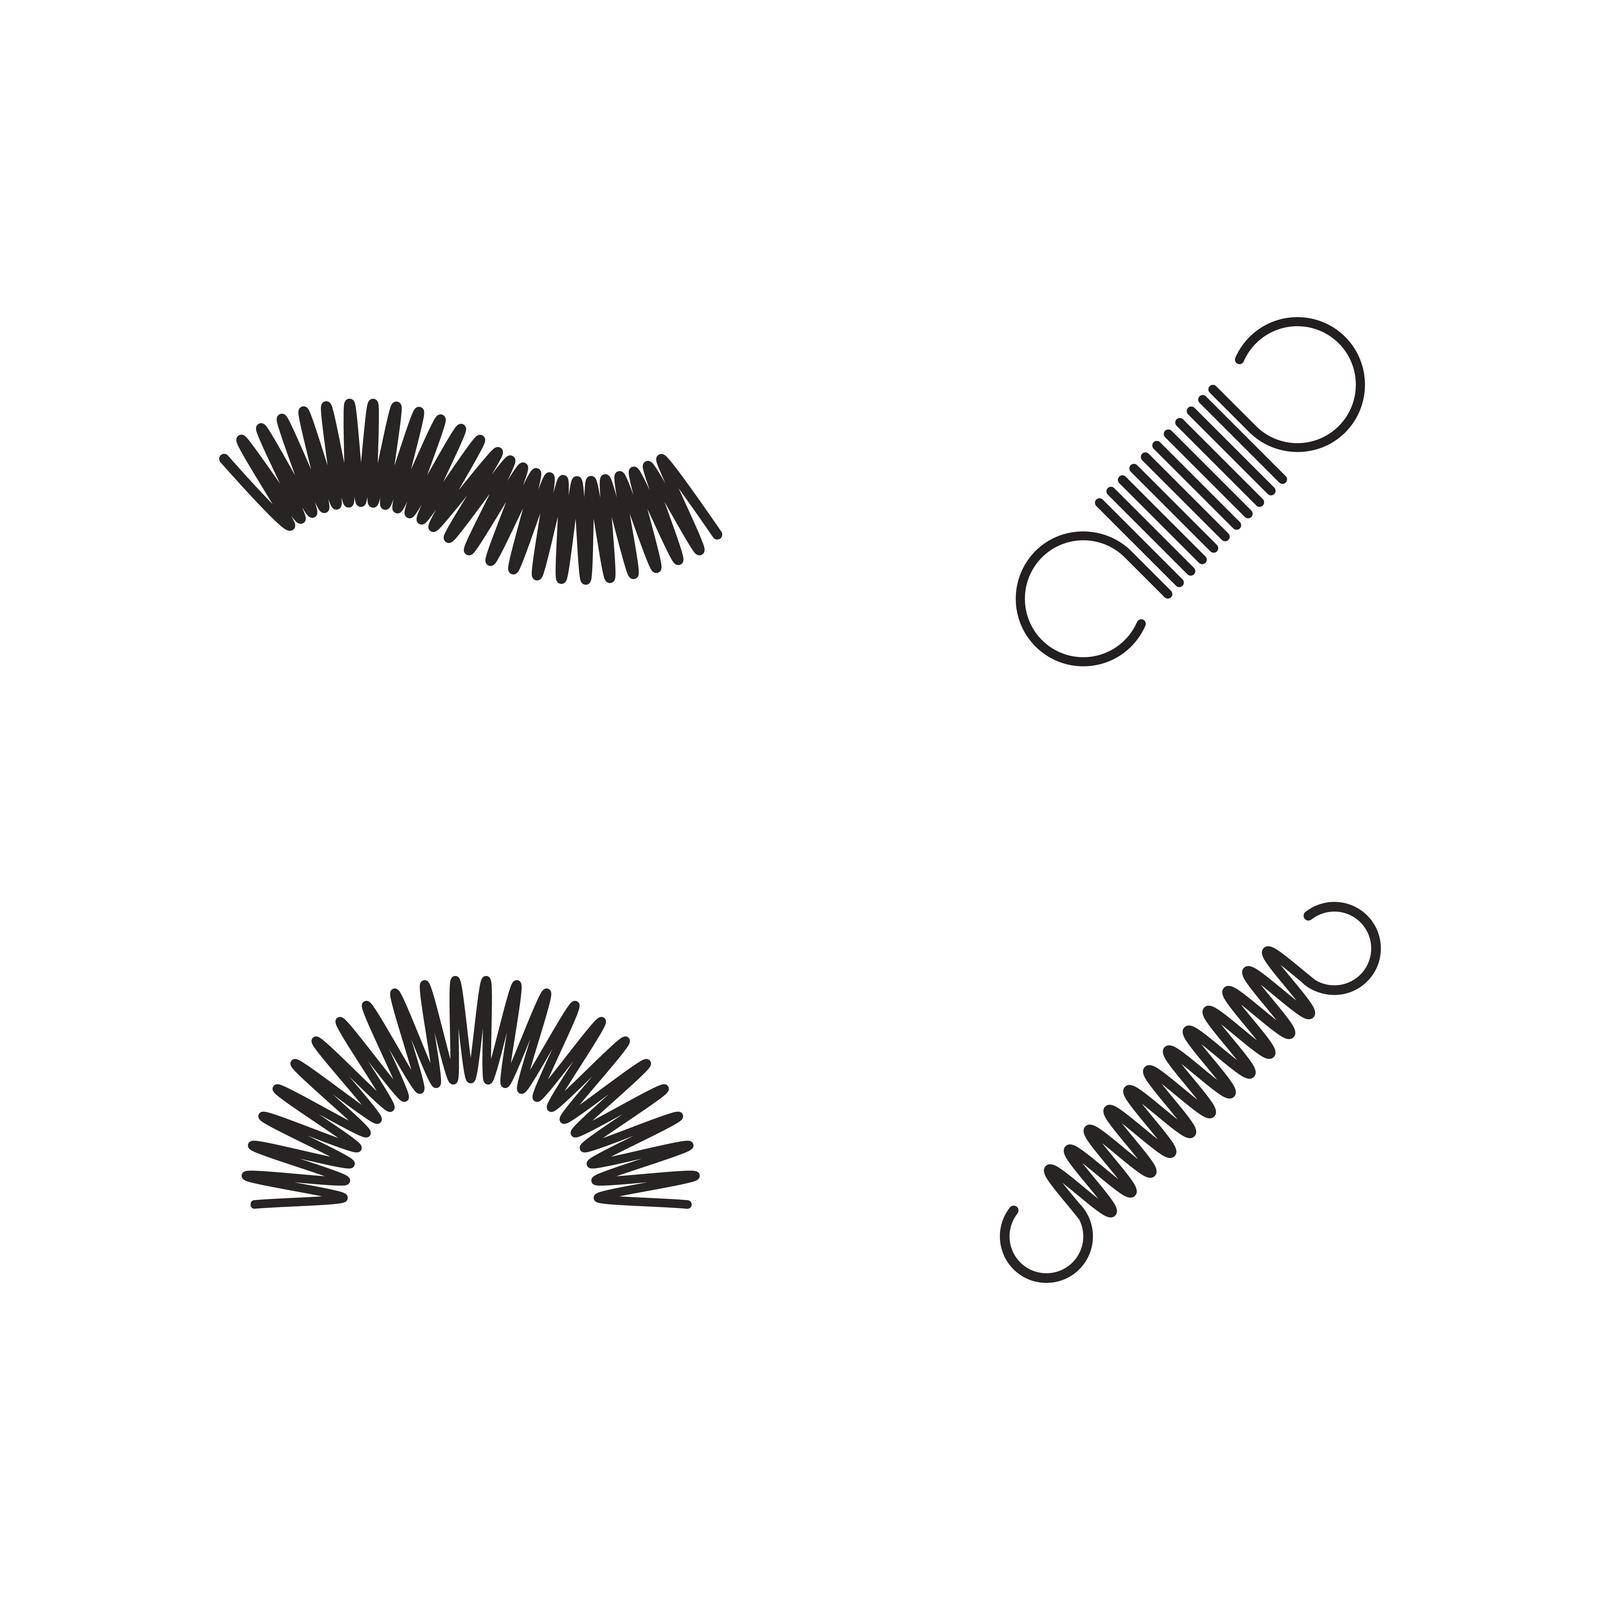 metal spring vector icon by rnking